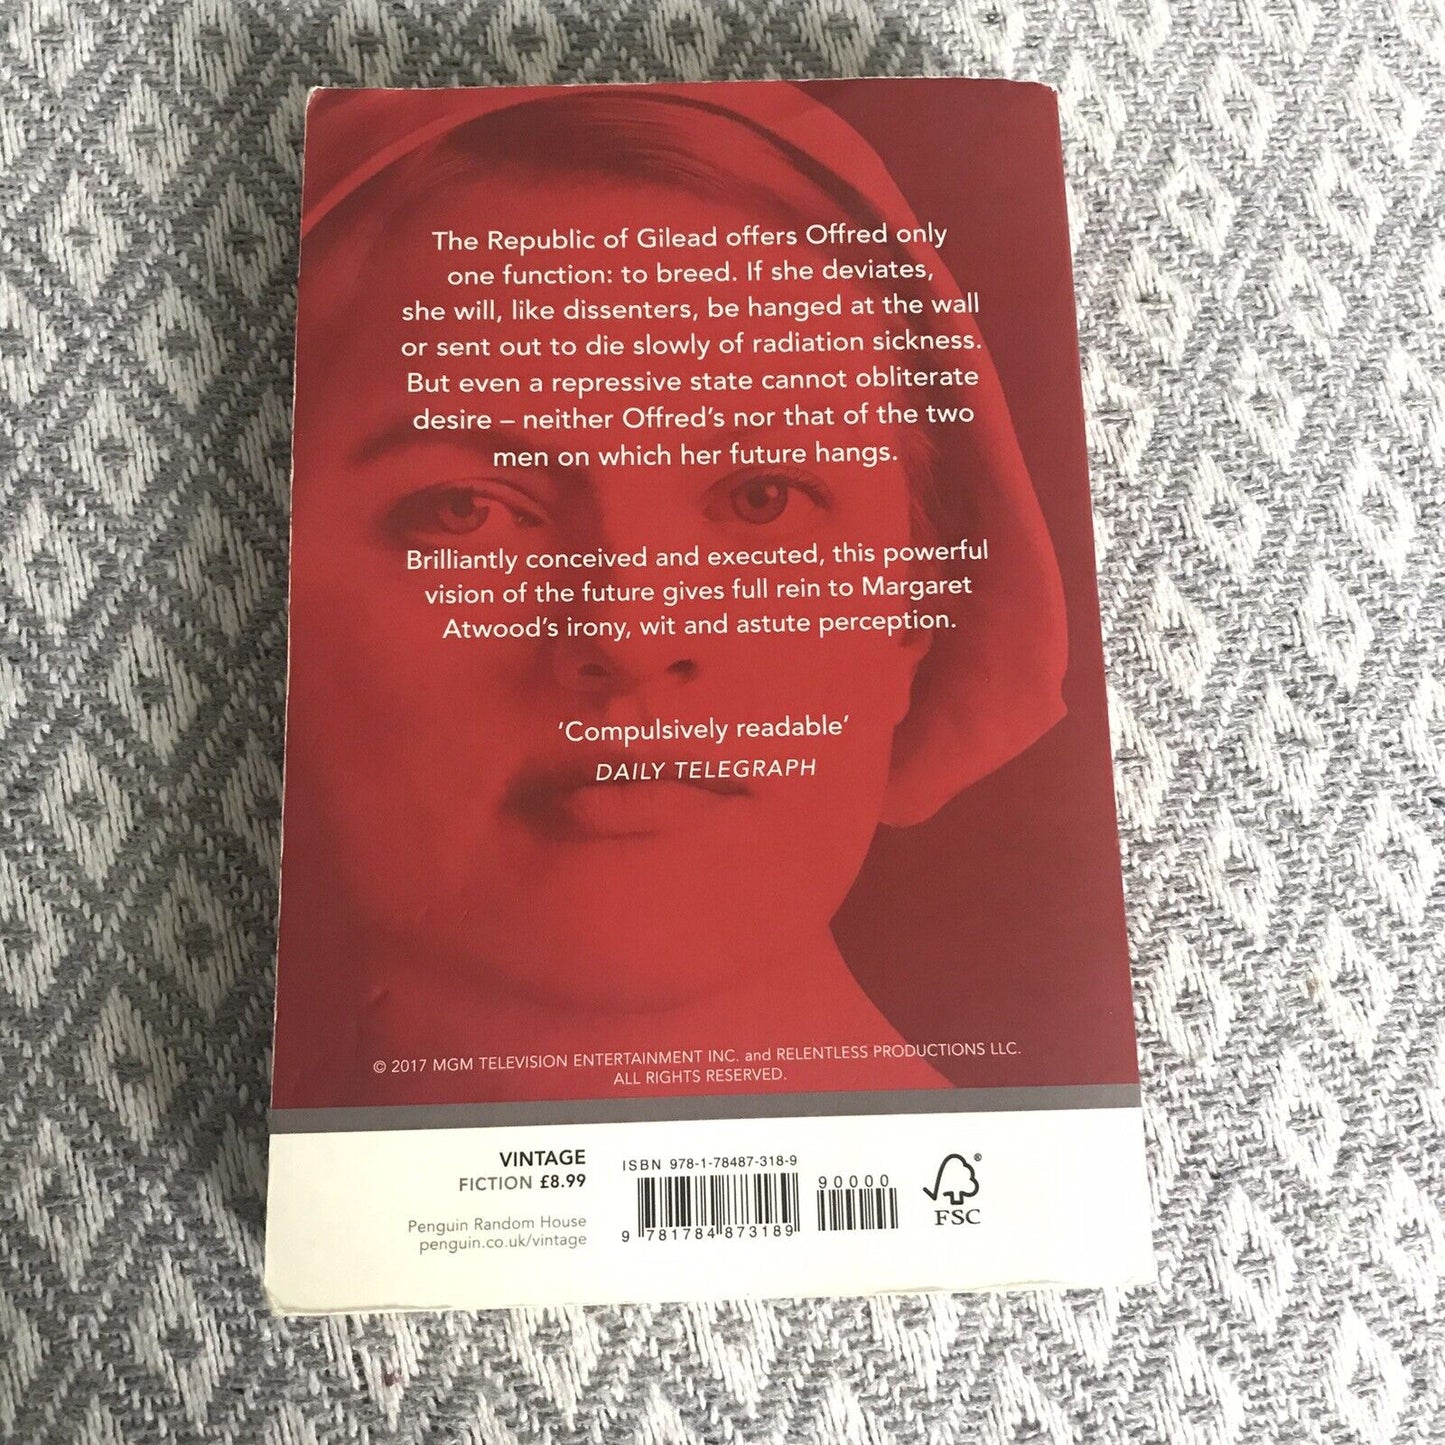 The Handmaid's Tale: the book that inspired the hit TV series by Margaret Atwood